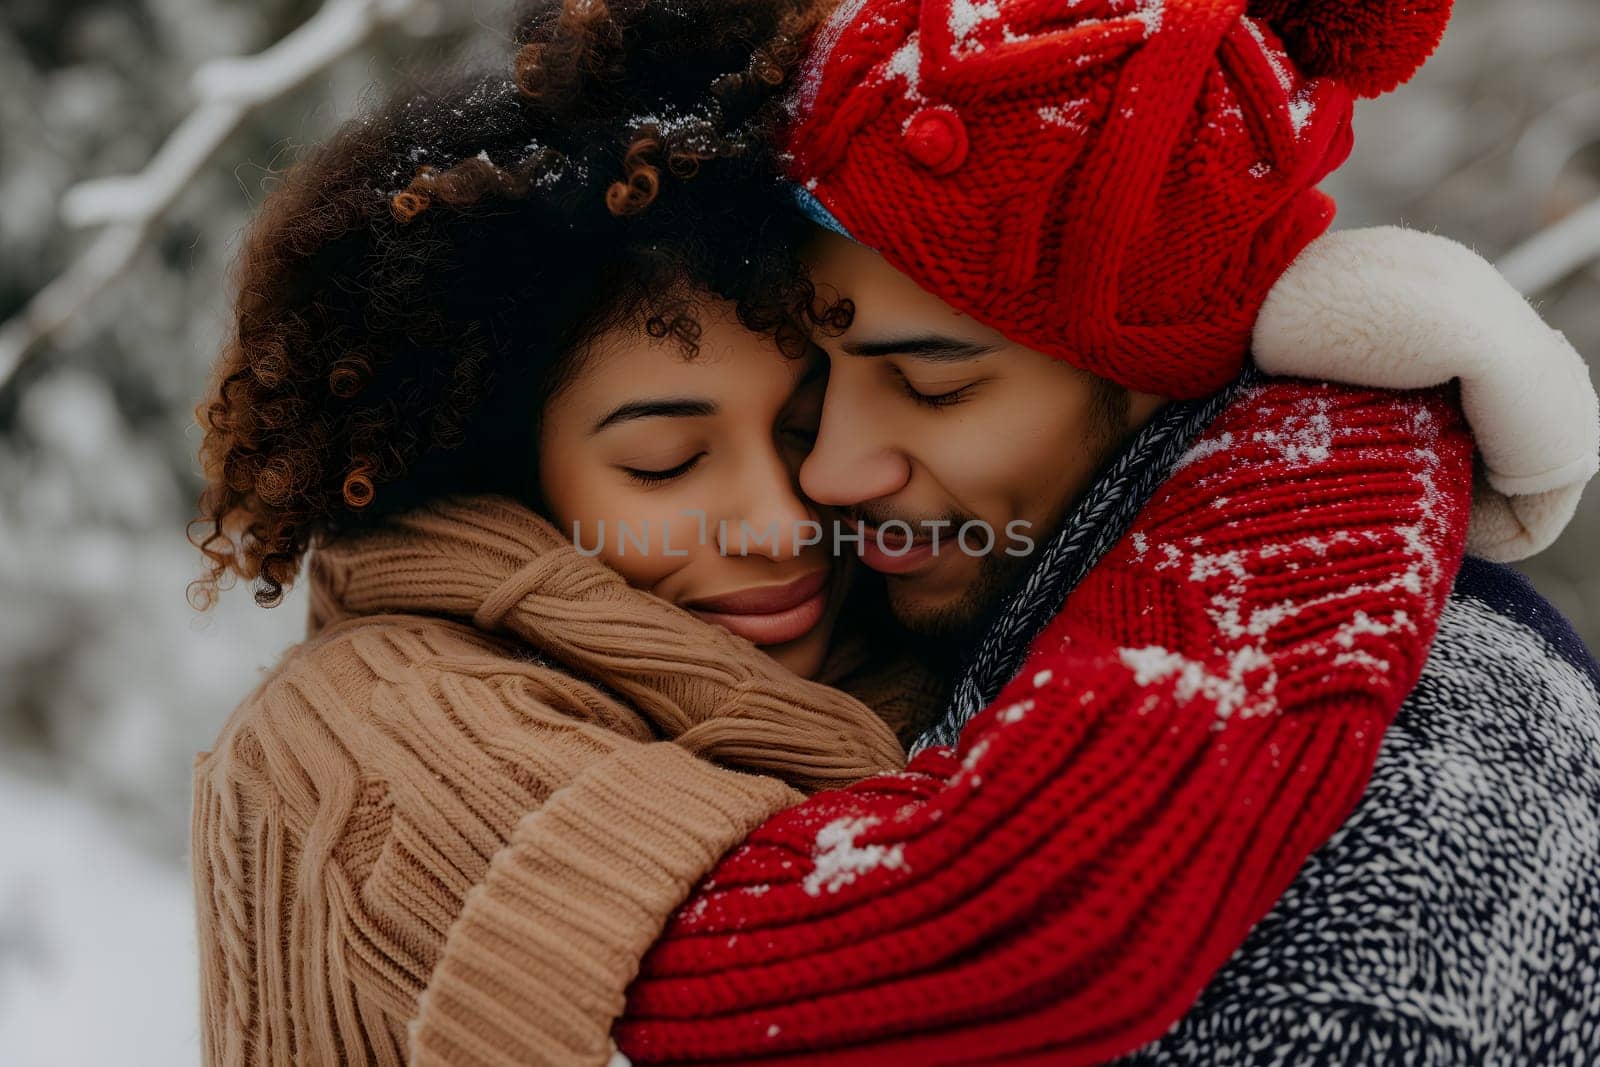 Heterosexual couple hugging at valentines day. Closeup portrait. Neural network generated image. Not based on any actual person or scene.